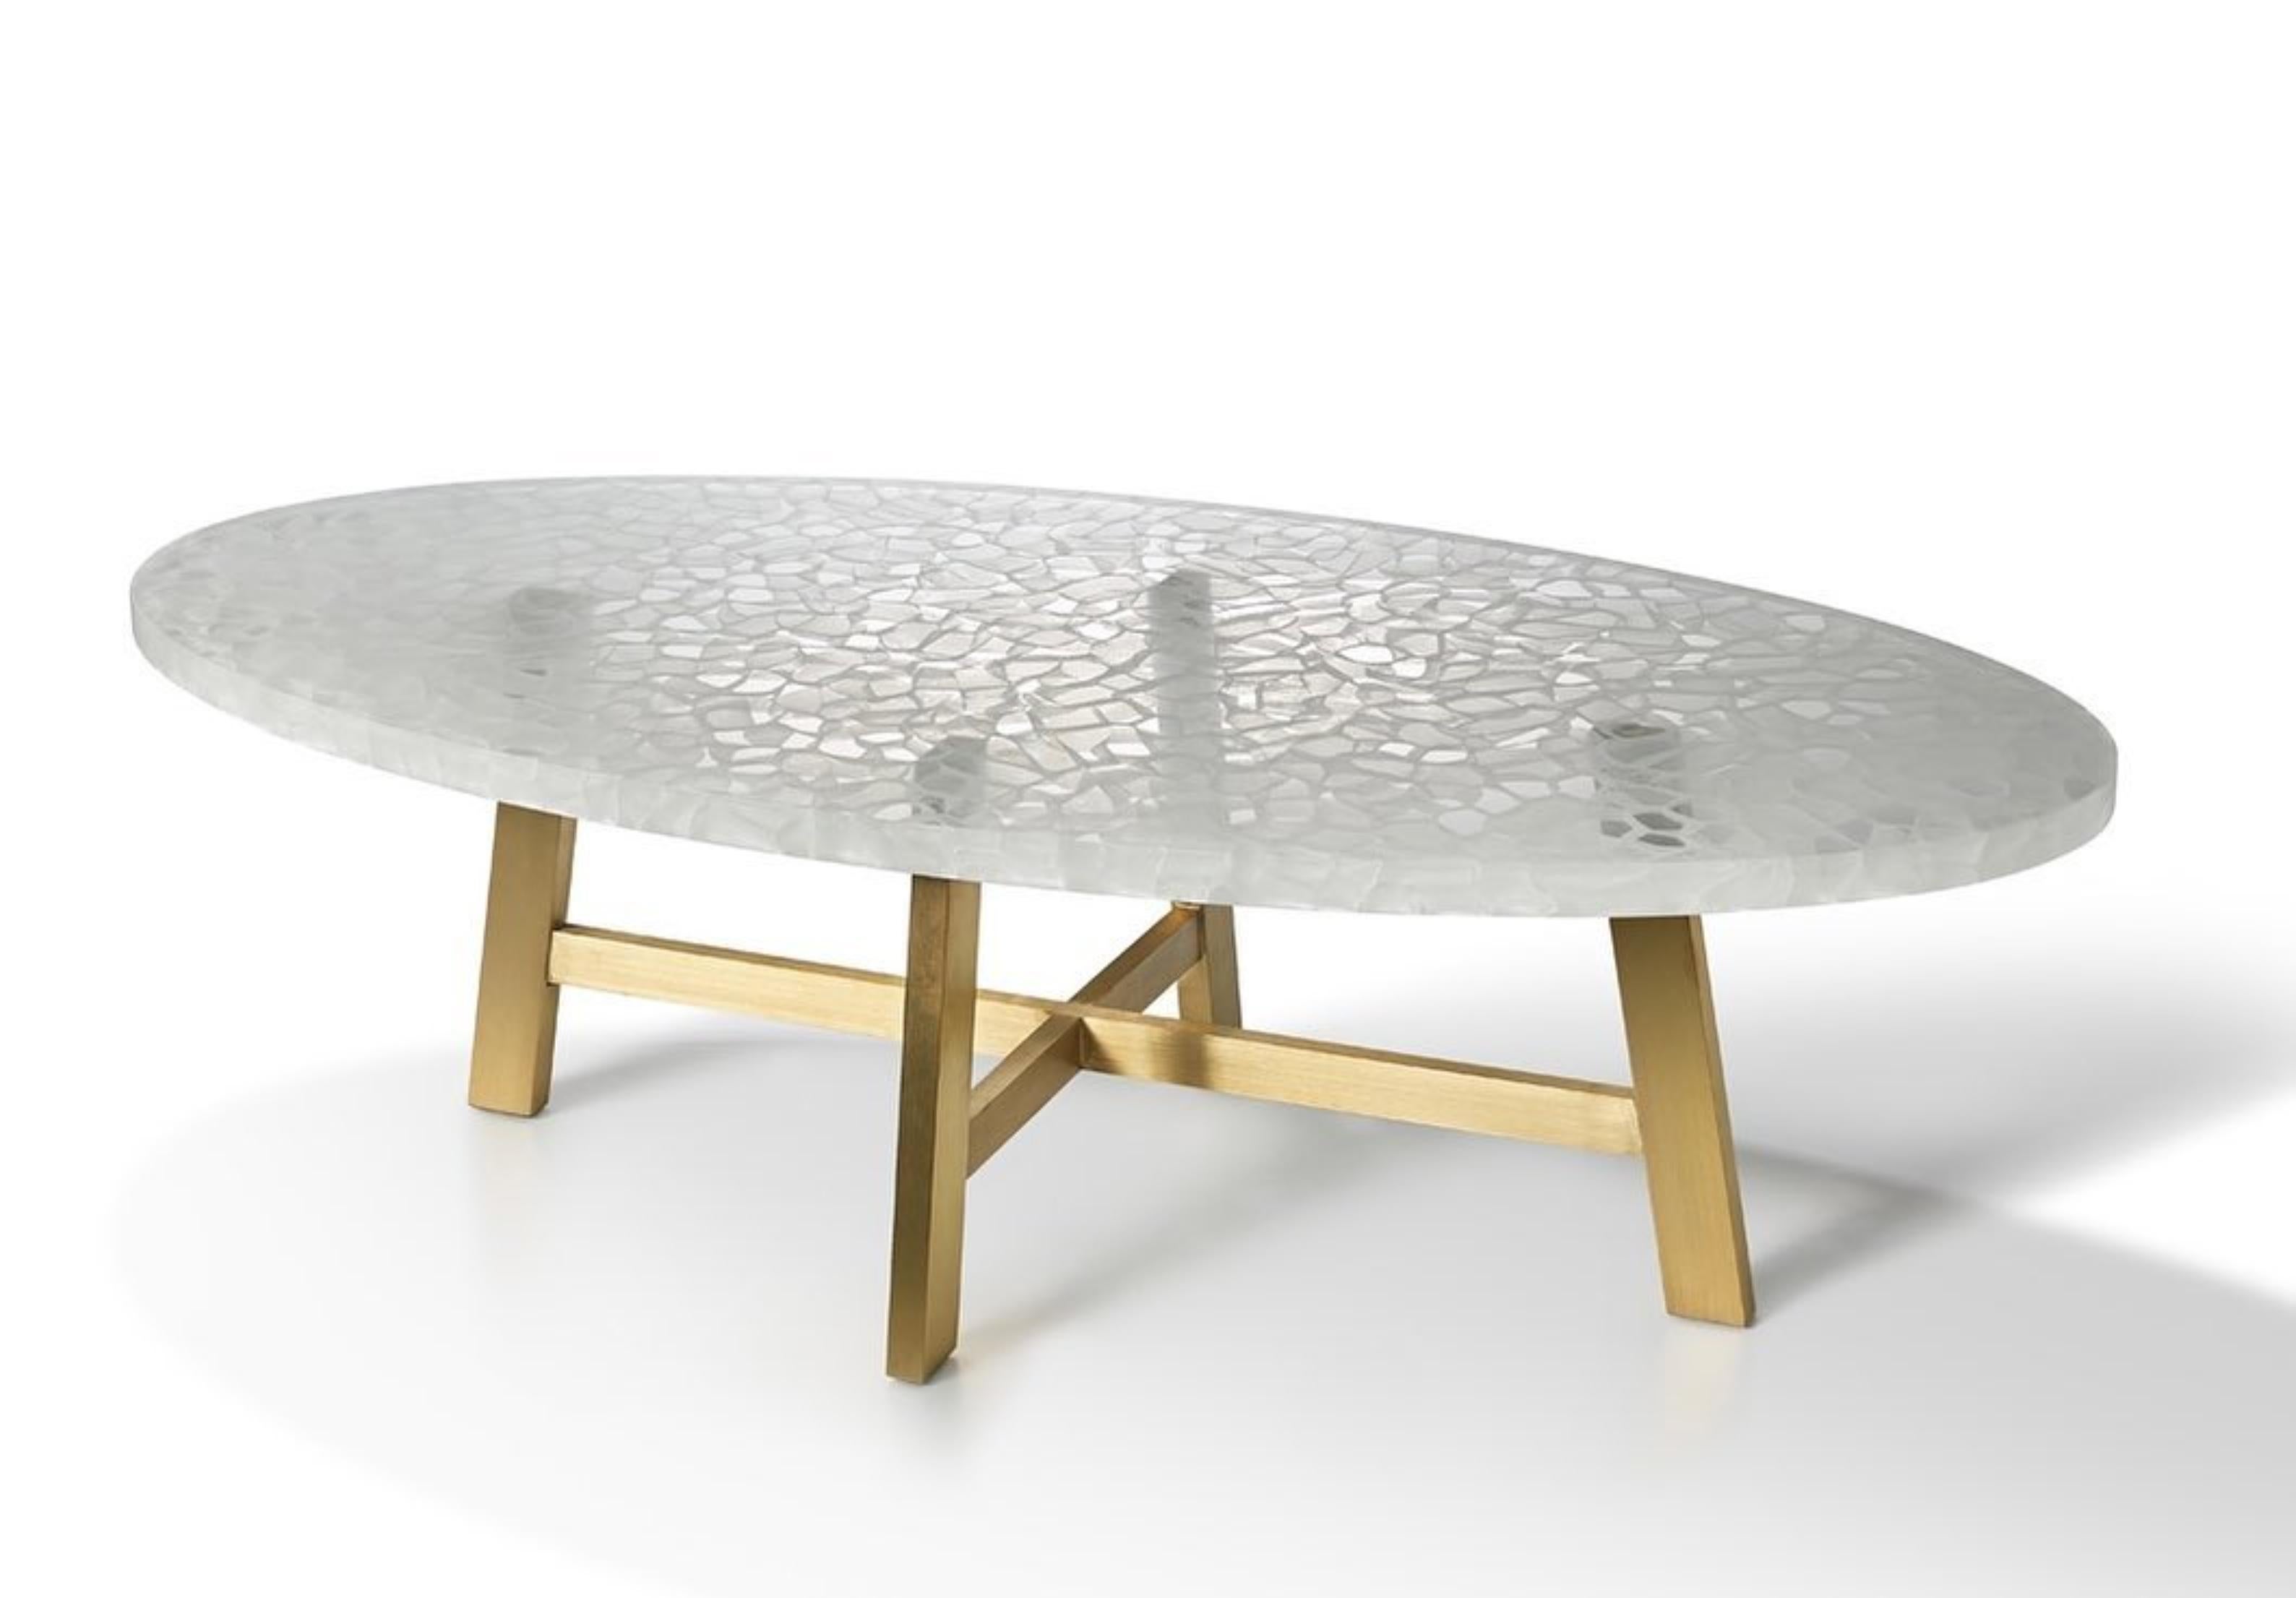 Rothwell Table by The GoodMan Studio
Dimensions: W 40 x D 132 x H 66 cm
Materials: Metal, Glass, Brass

Kilncast and polished Glass and Brass Table base

The Goodman Studio has been internationally recognized for its modern blown glass vessels, and